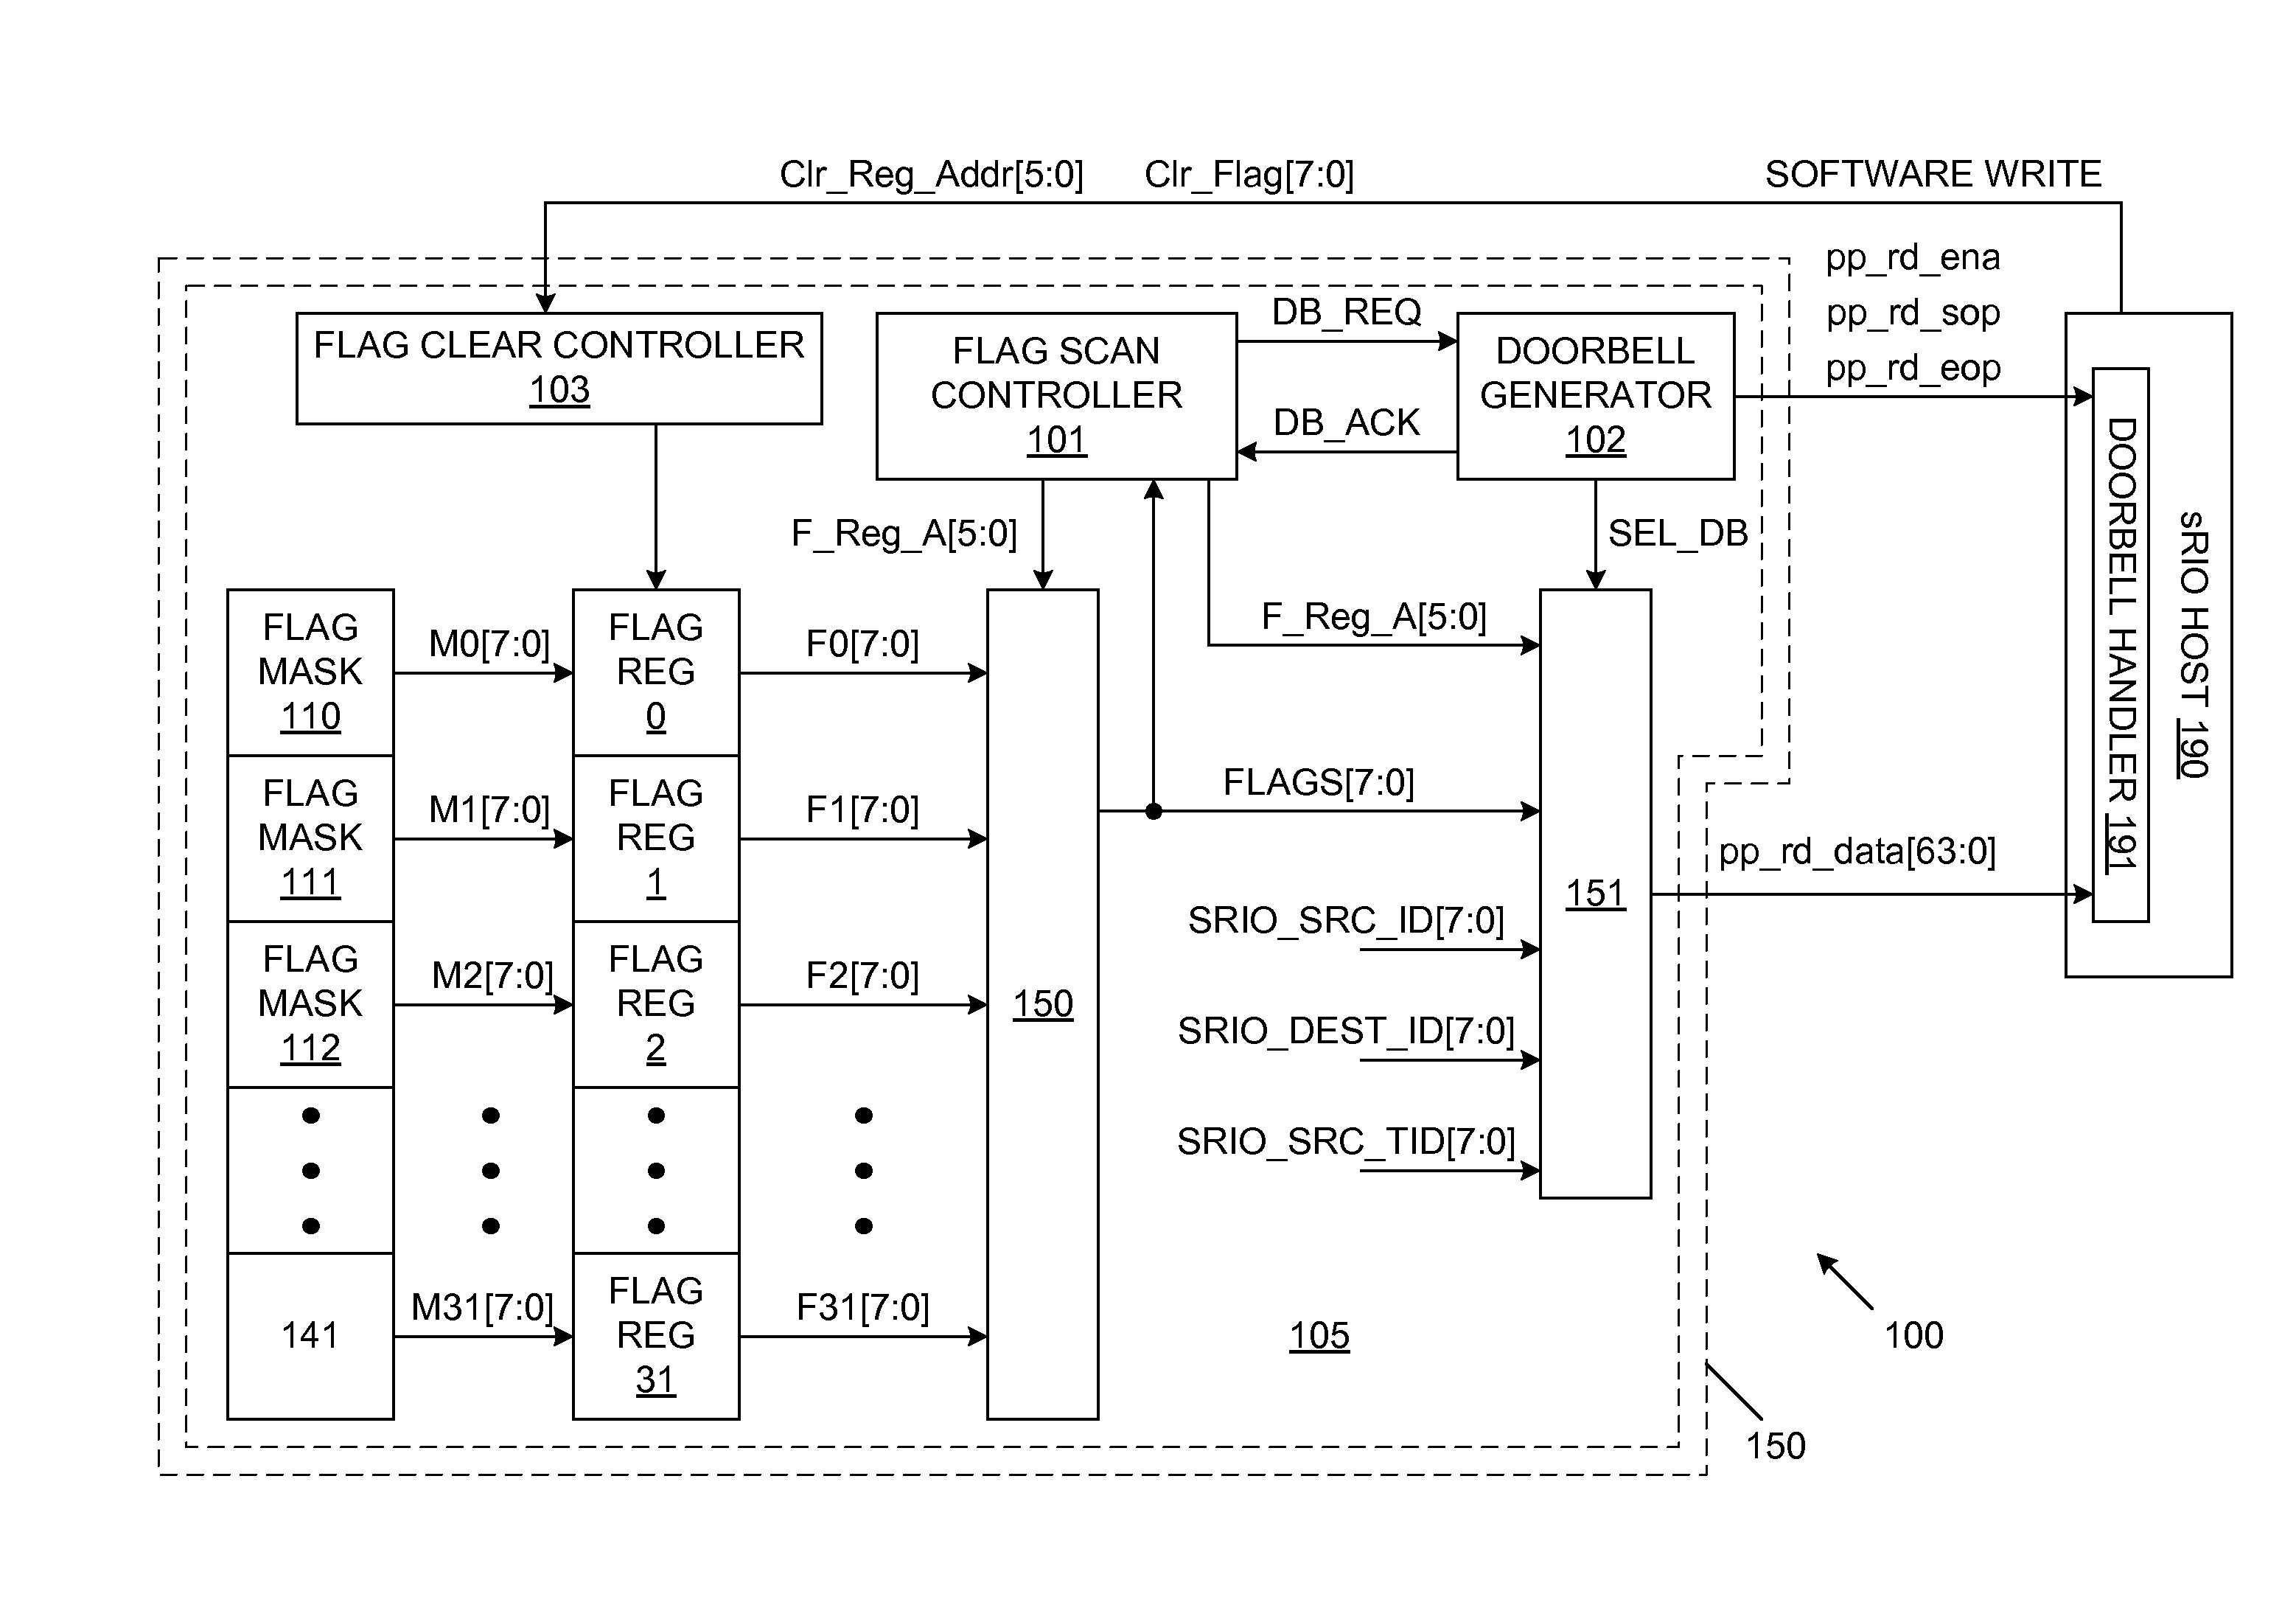 Rapid input/output doorbell coalescing to minimize CPU utilization and reduce system interrupt latency